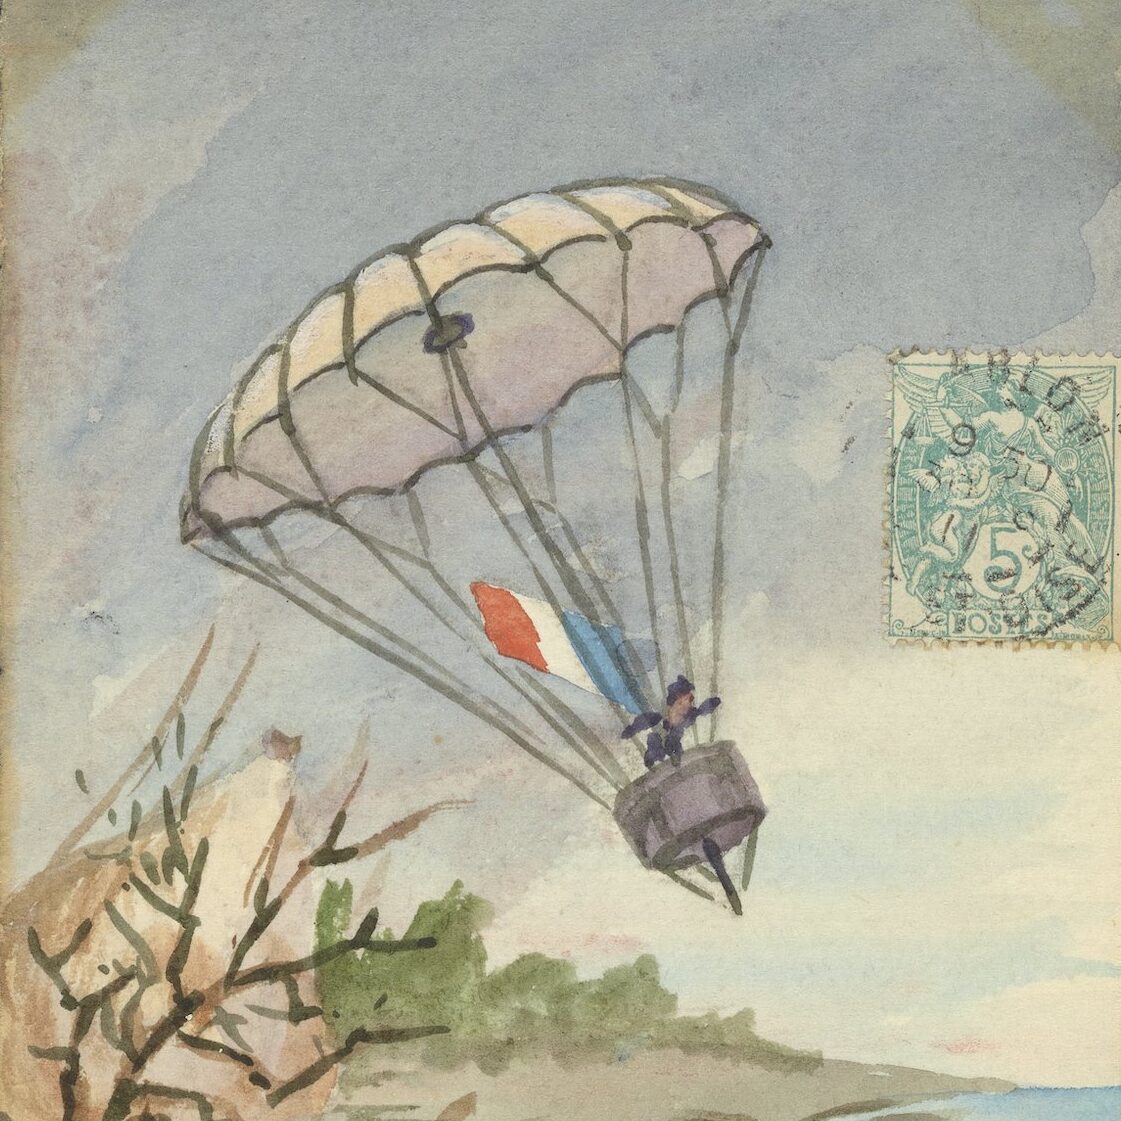 Postcard featuring a hand-drawn watercolor depiction of the descent of French balloonist André-Jacques Garnerin (1769-1823) in a frameless parachute of his own design